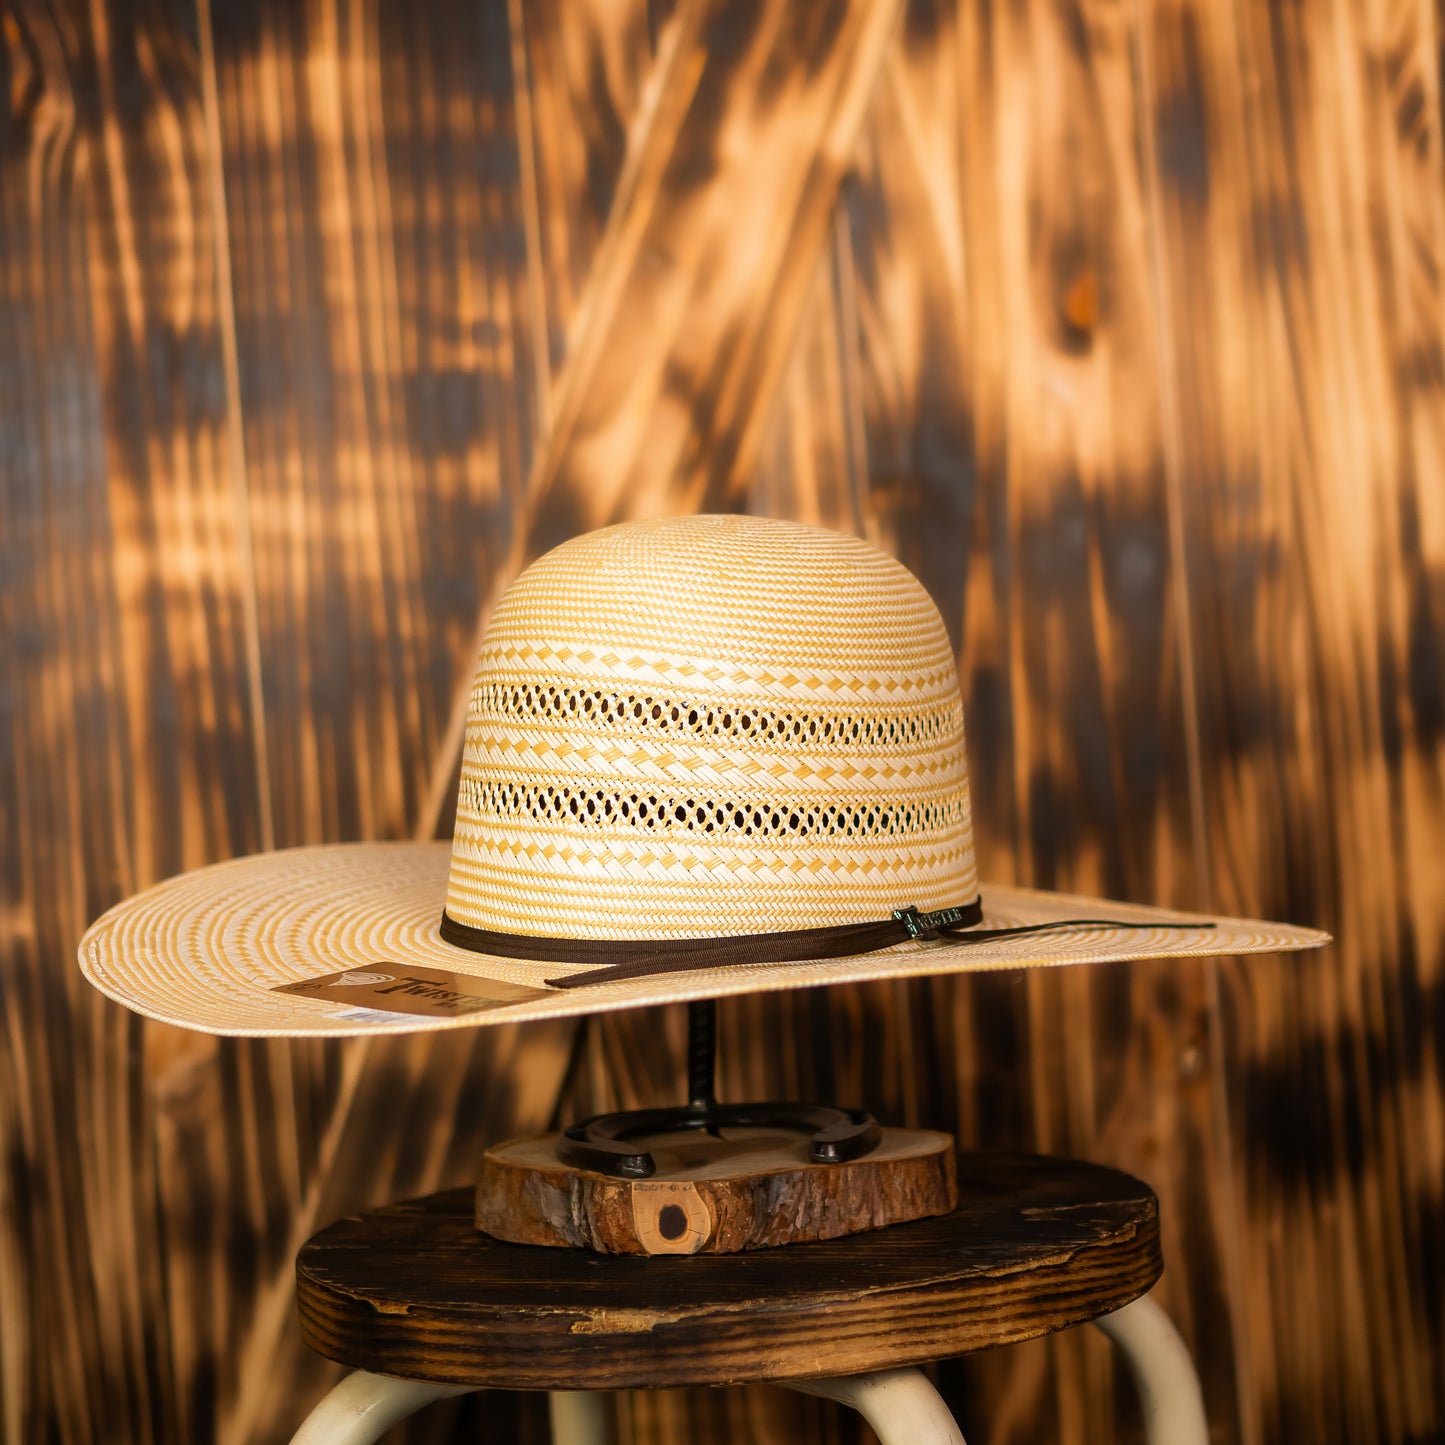 Twister Straw Hat Regular Crown Two Rounds Tan White